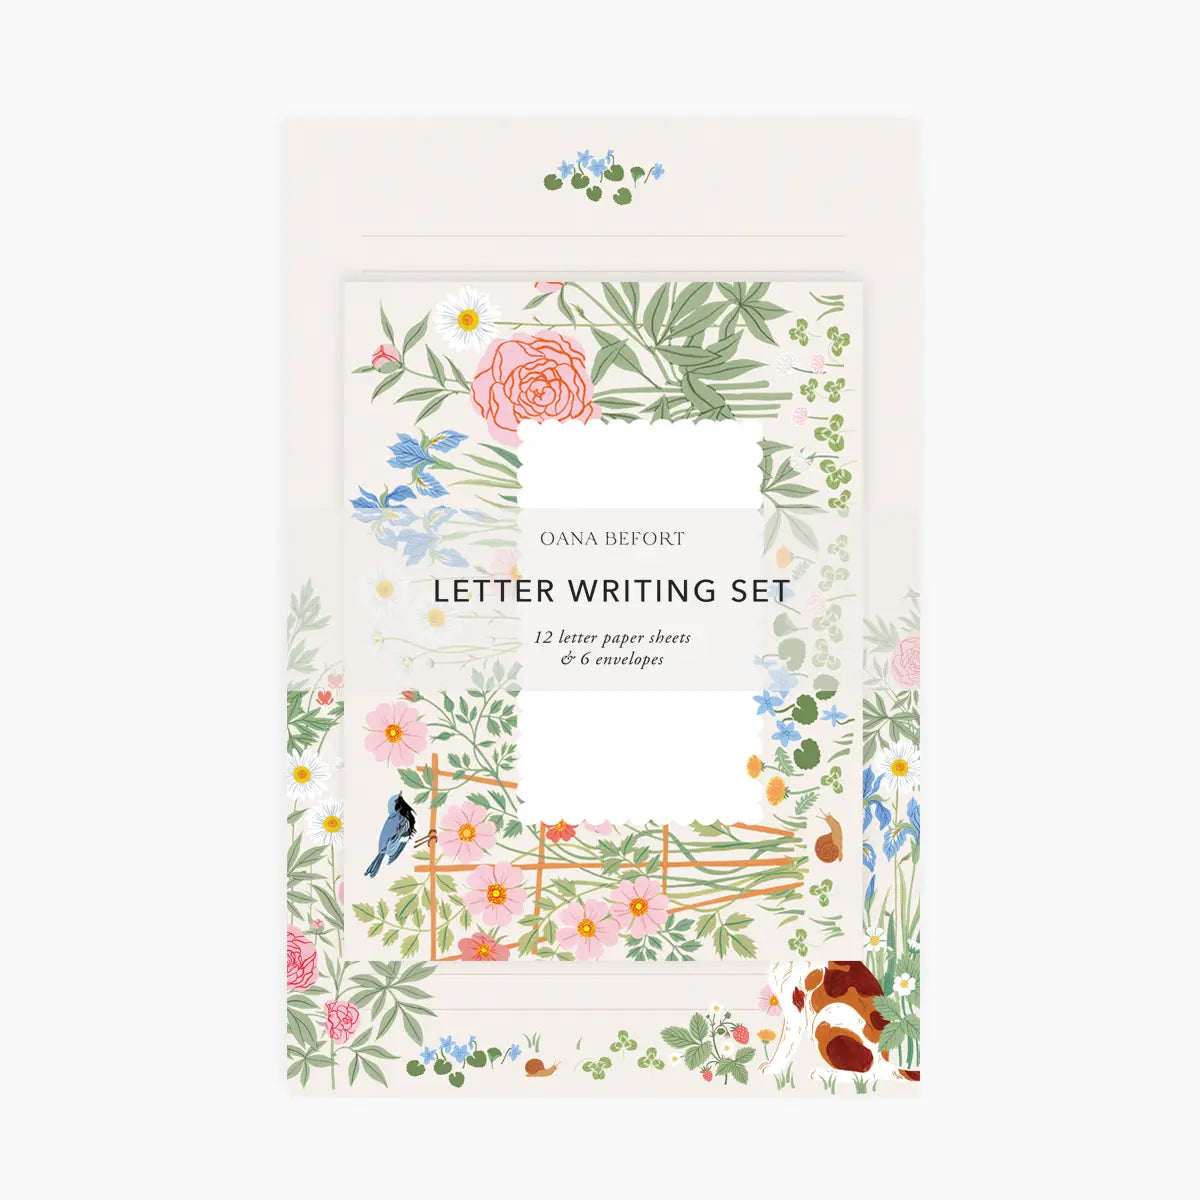 Letter writing set 'Garden' by Botanica Paper co.